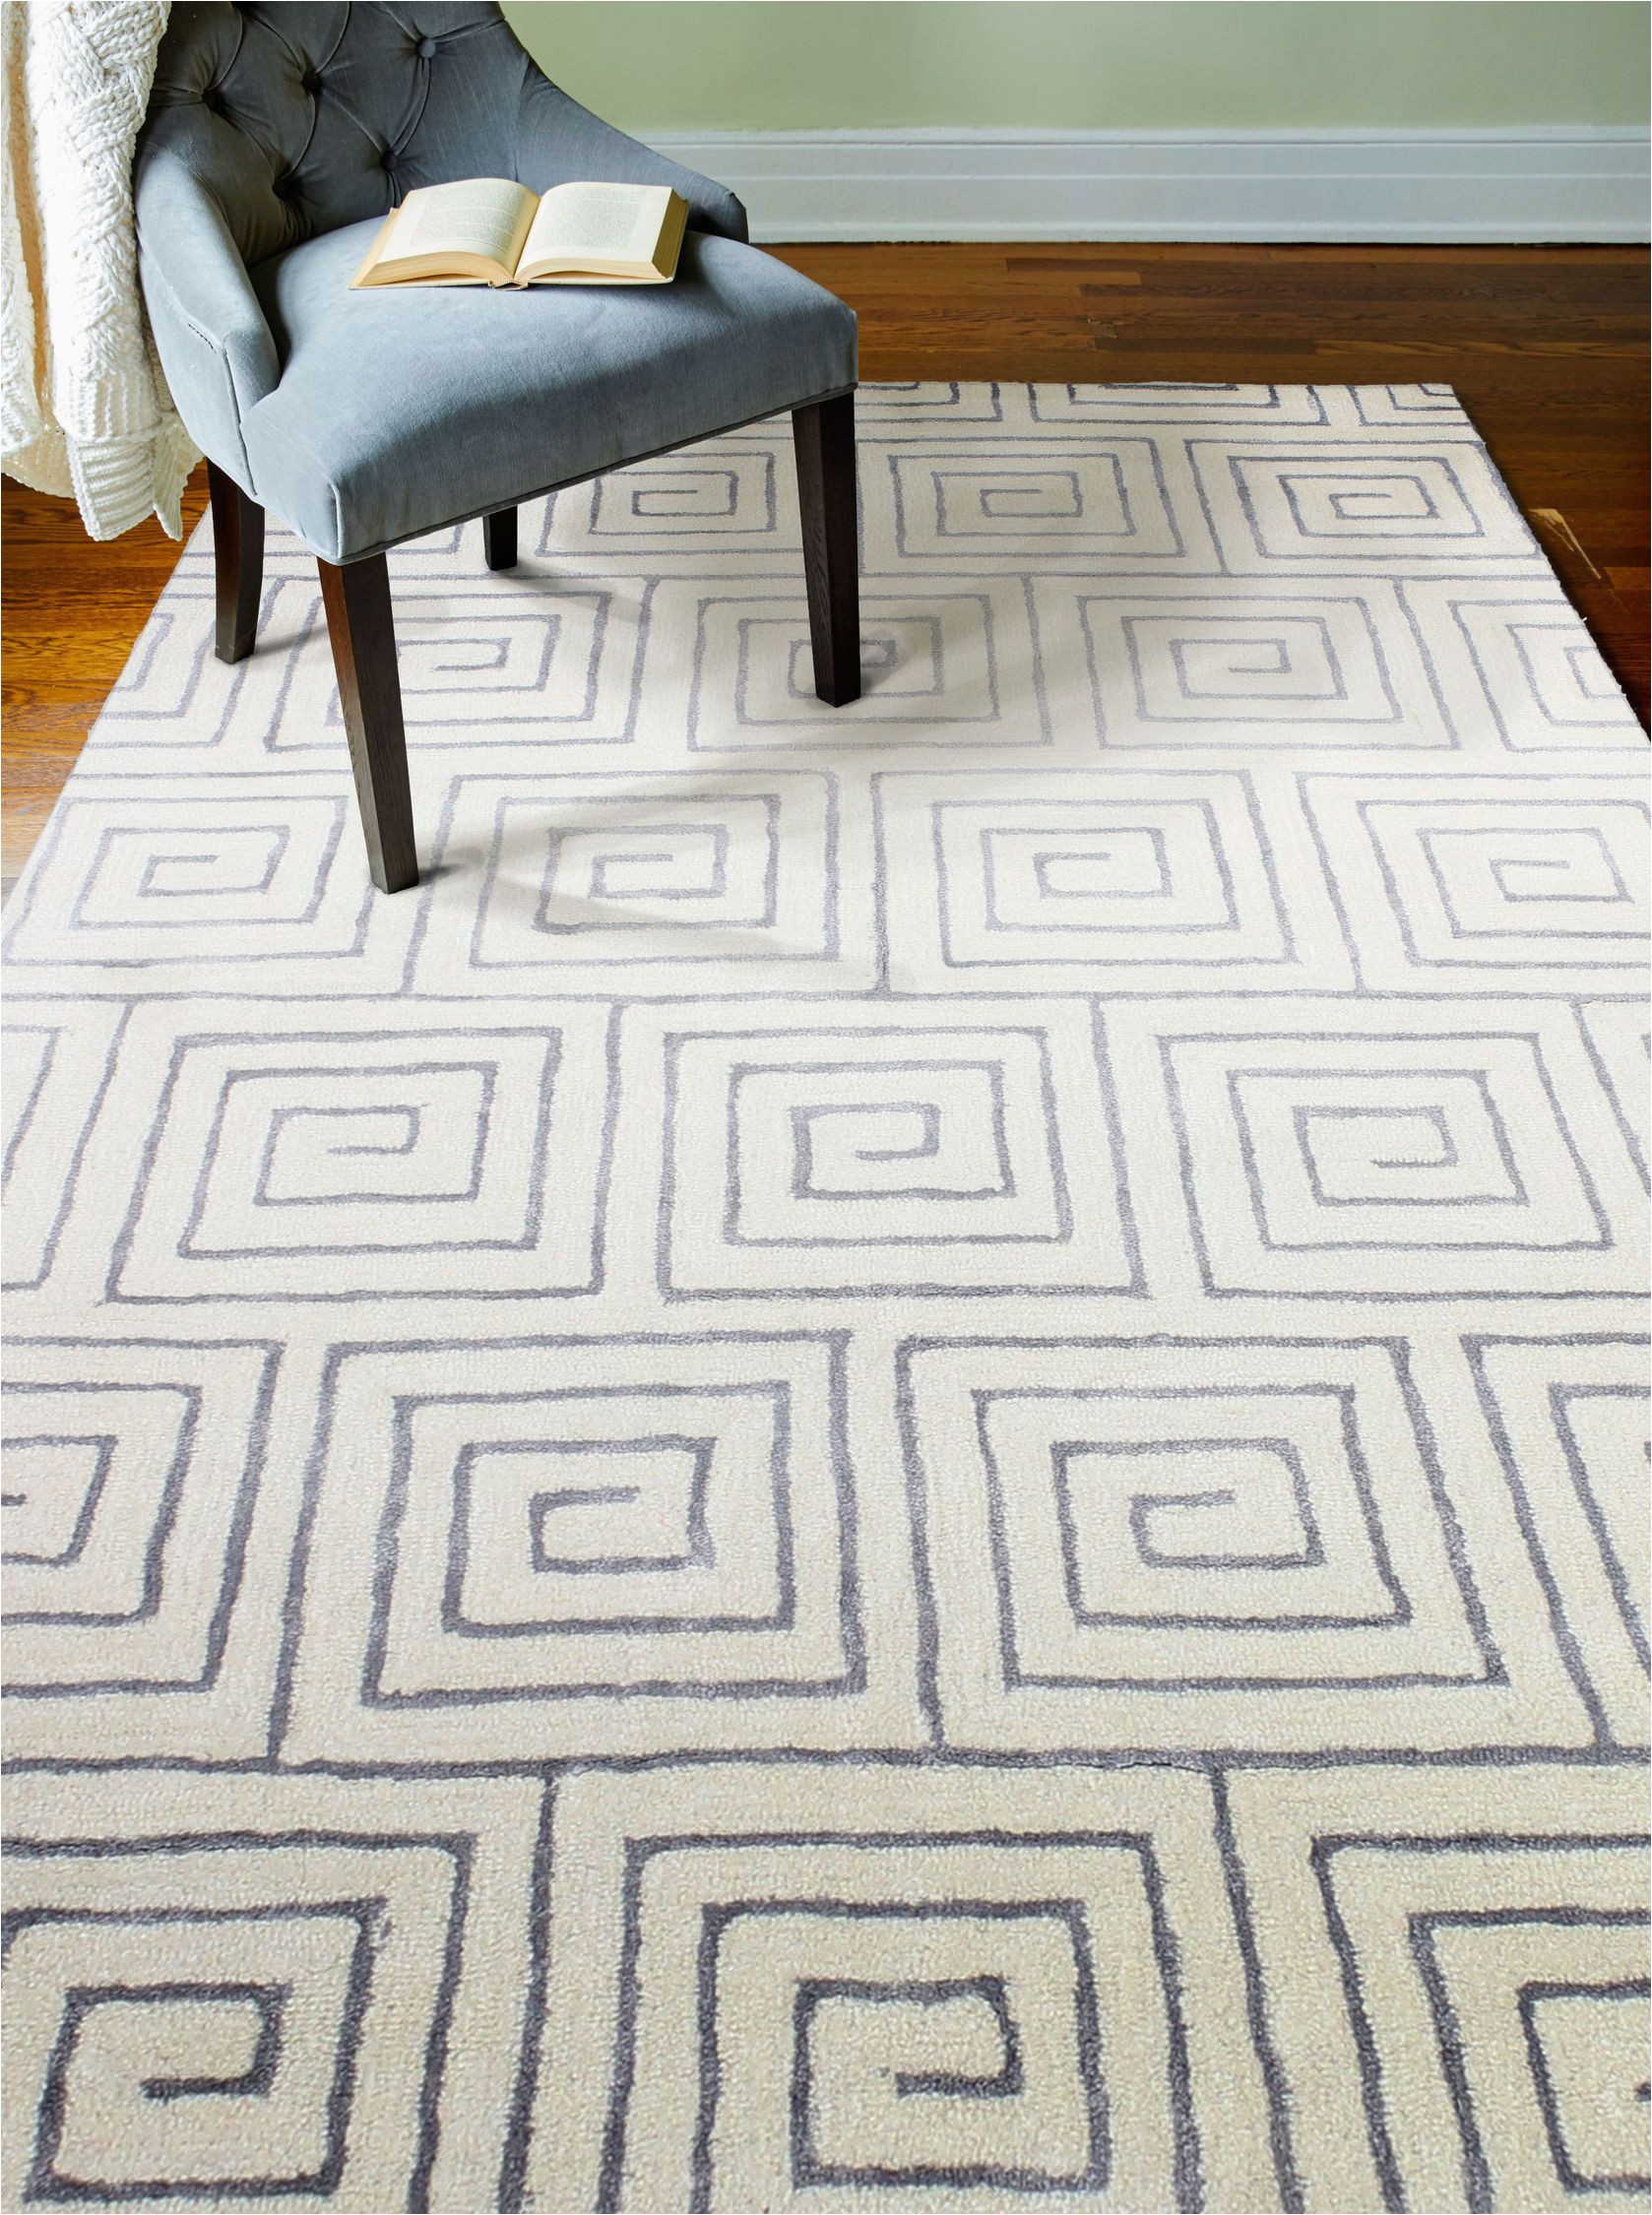 5×7 Gray and White area Rug Seville Rug Color White Gray Size 5 X 7 6"